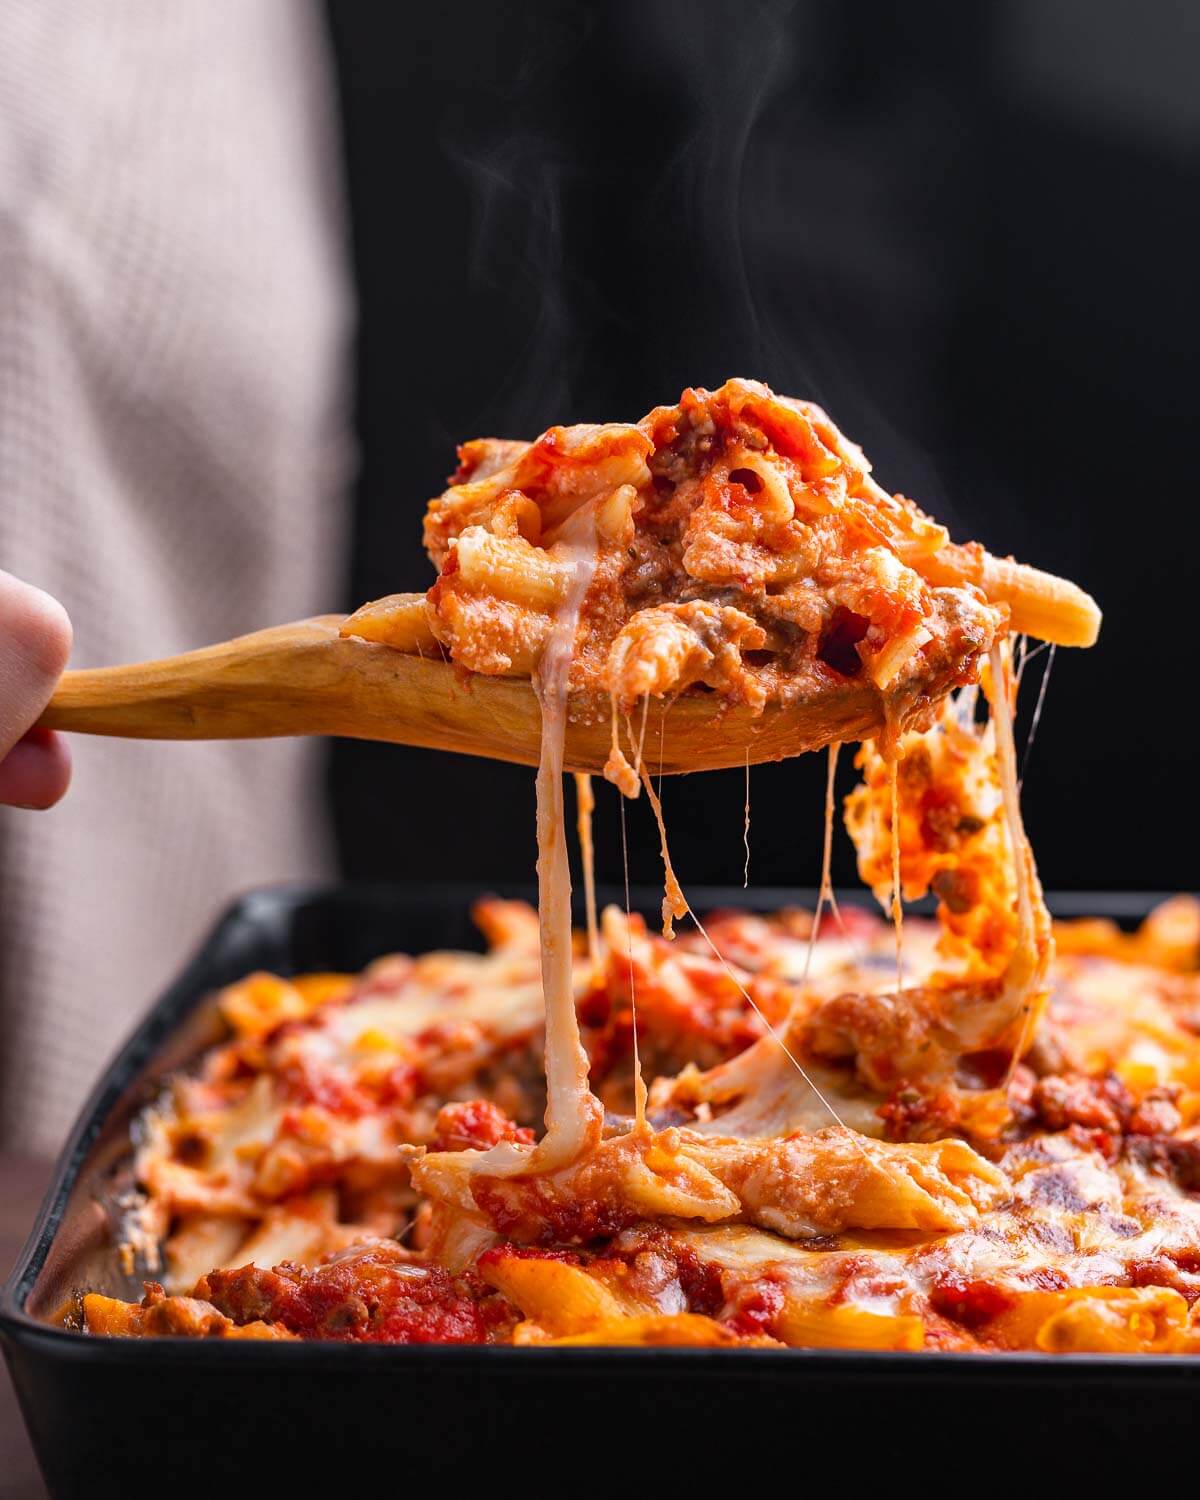 Large wooden spoon holding baked pasta with cheese.